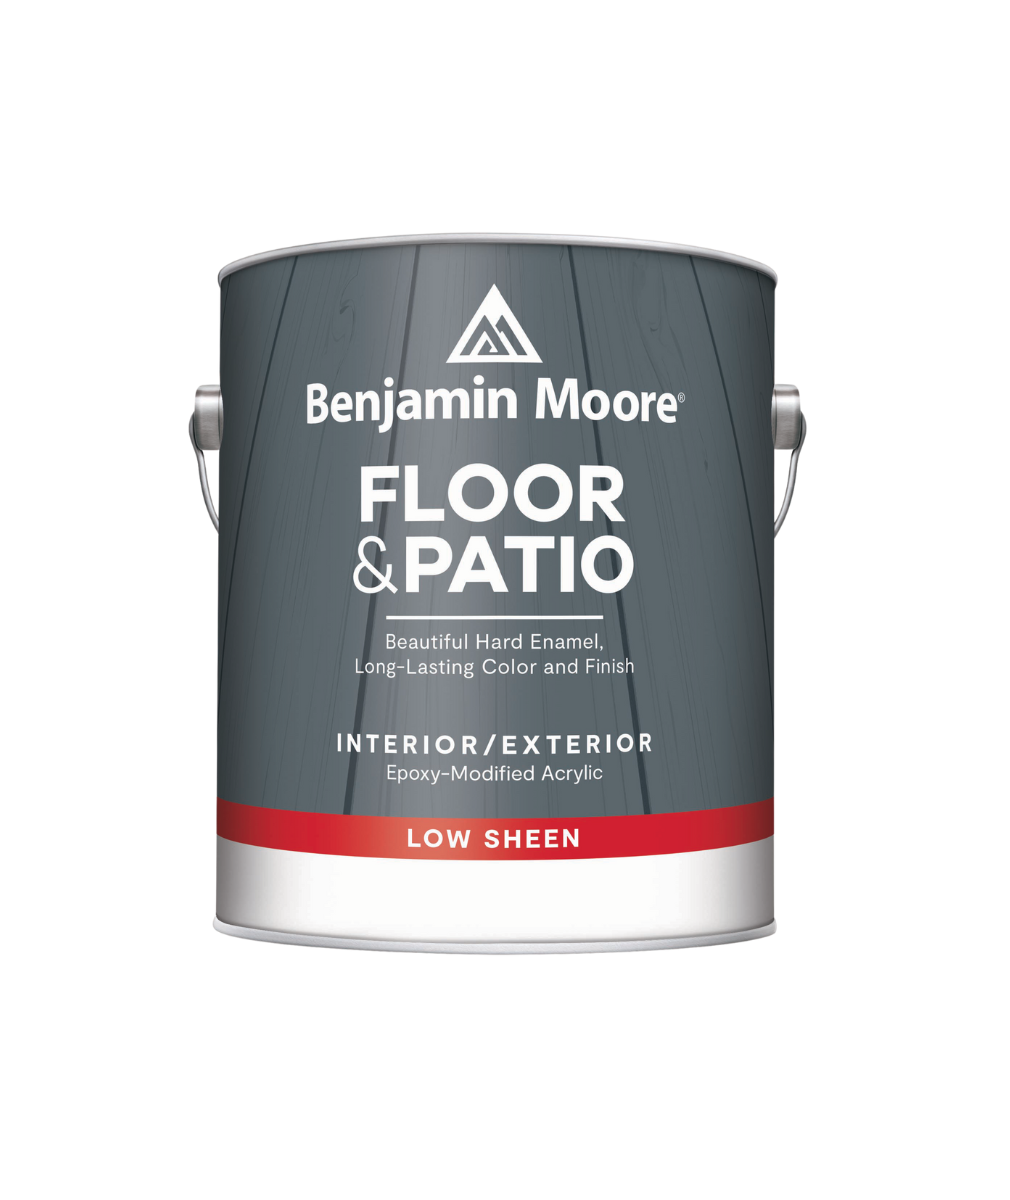  Benjamin Moore Floor & Patio Interior/Exterior Latex Paint, available at Barrydowne Paint.